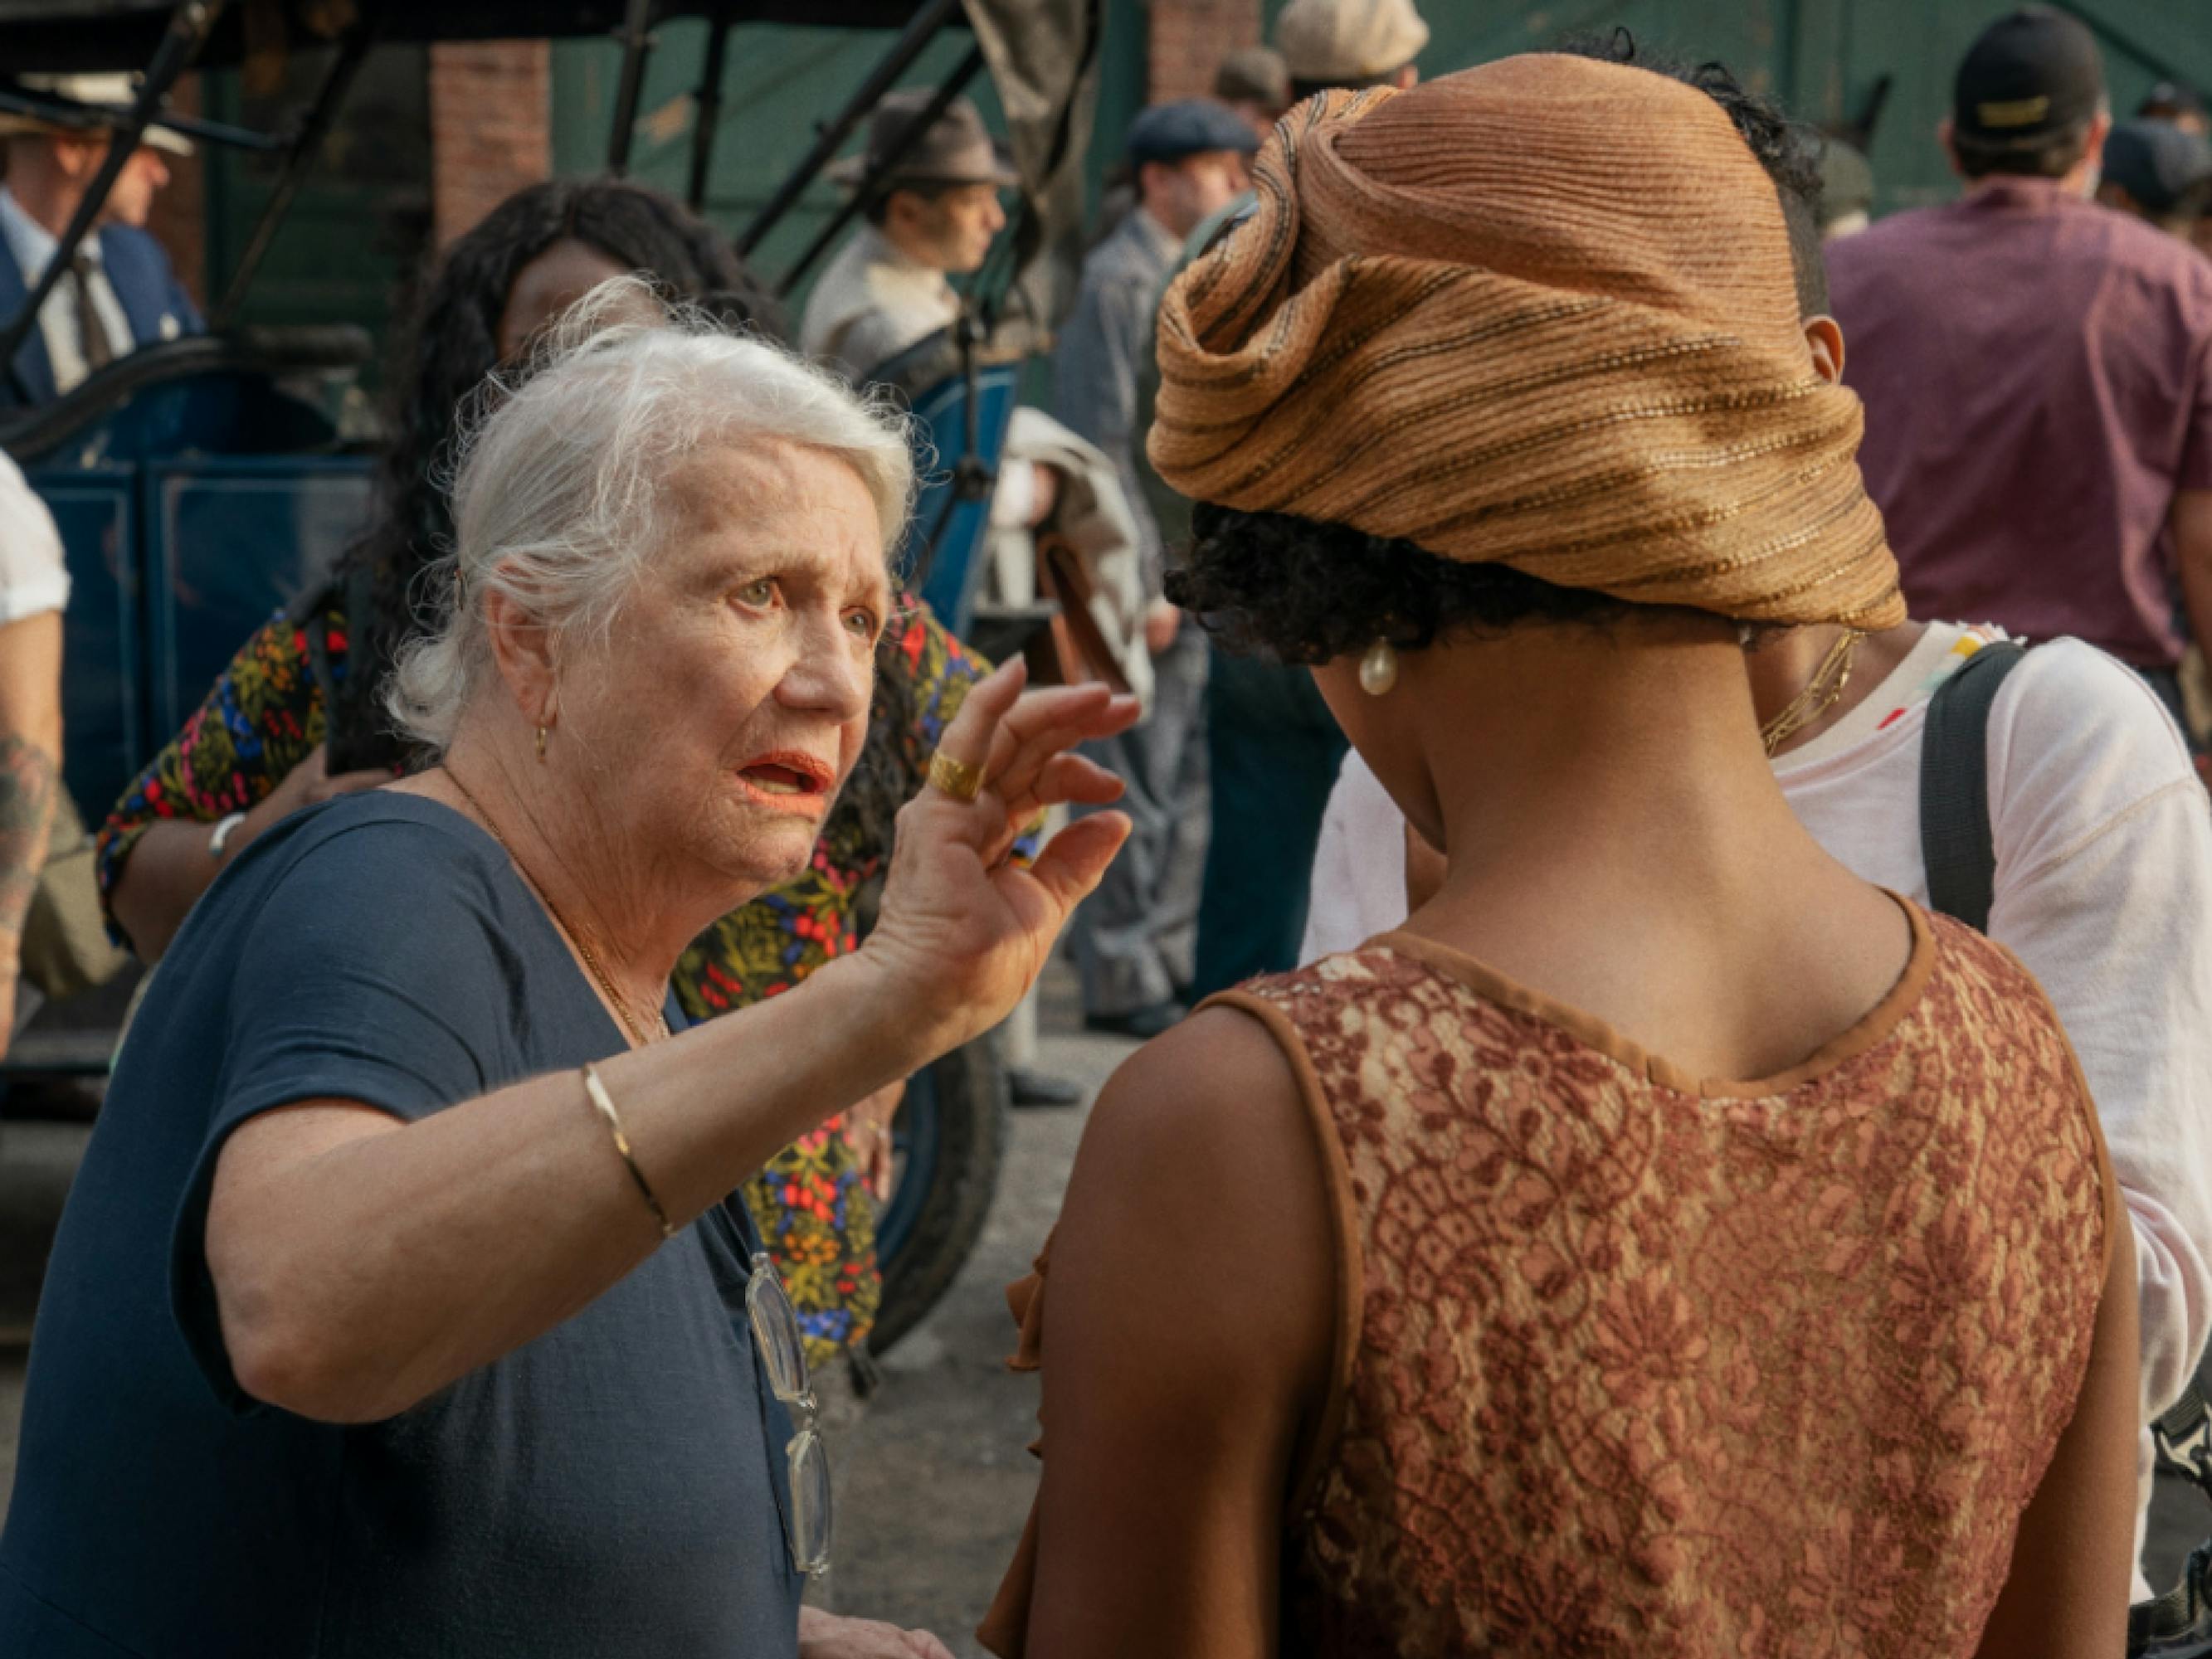 Costume designer Ann Roth looks over the costume of Dussie Mae actor Taylour Paige. A busy set lives and breathes behind them. 